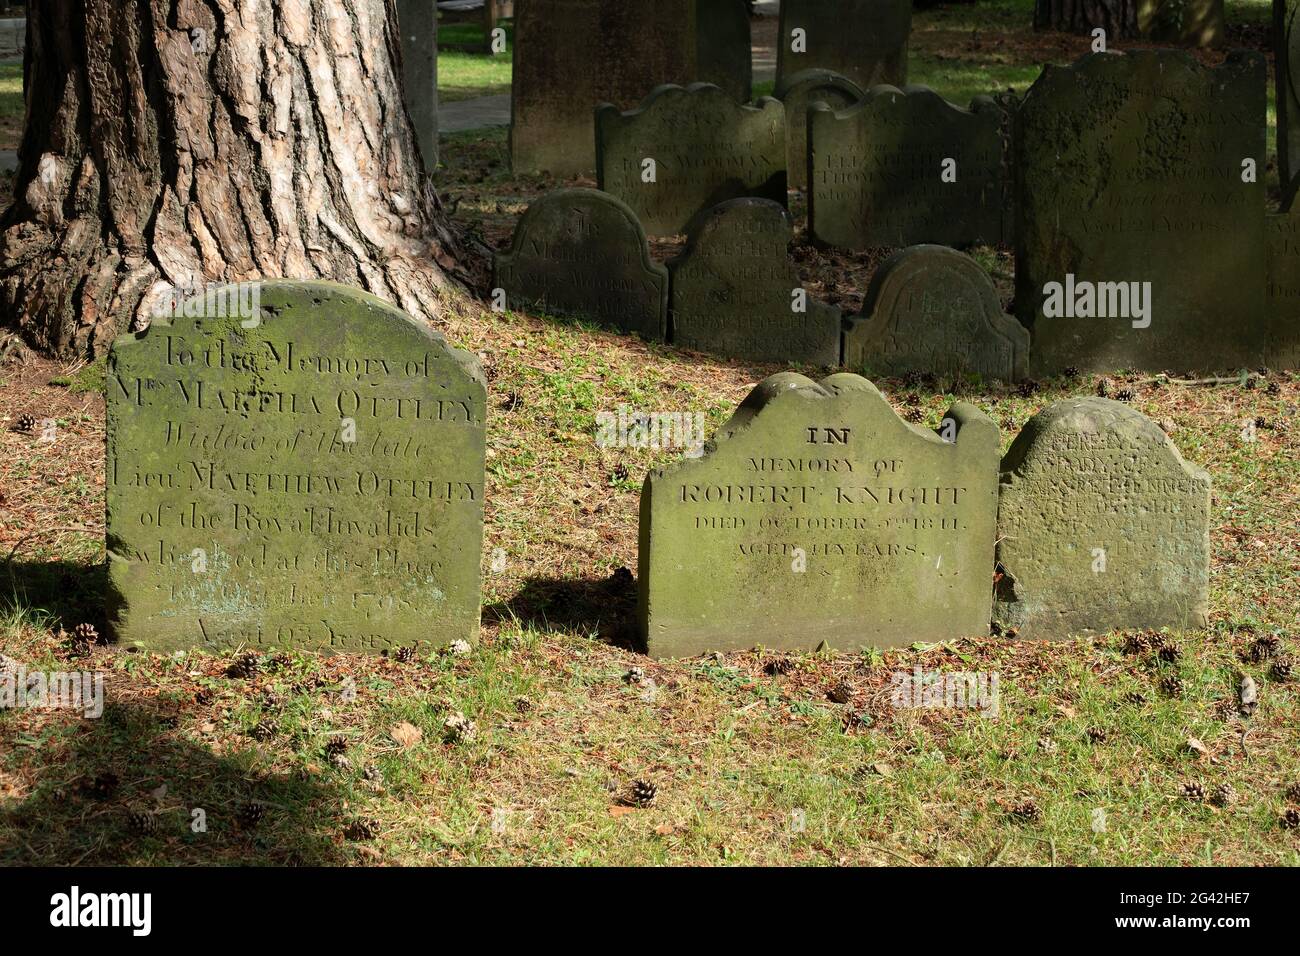 EAST GRINSTEAD, WEST SUSSEX/UK - AUGUST 30 : Headstones in St Swithun's Church graveyard in East Grinstead West Sussex on August Stock Photo